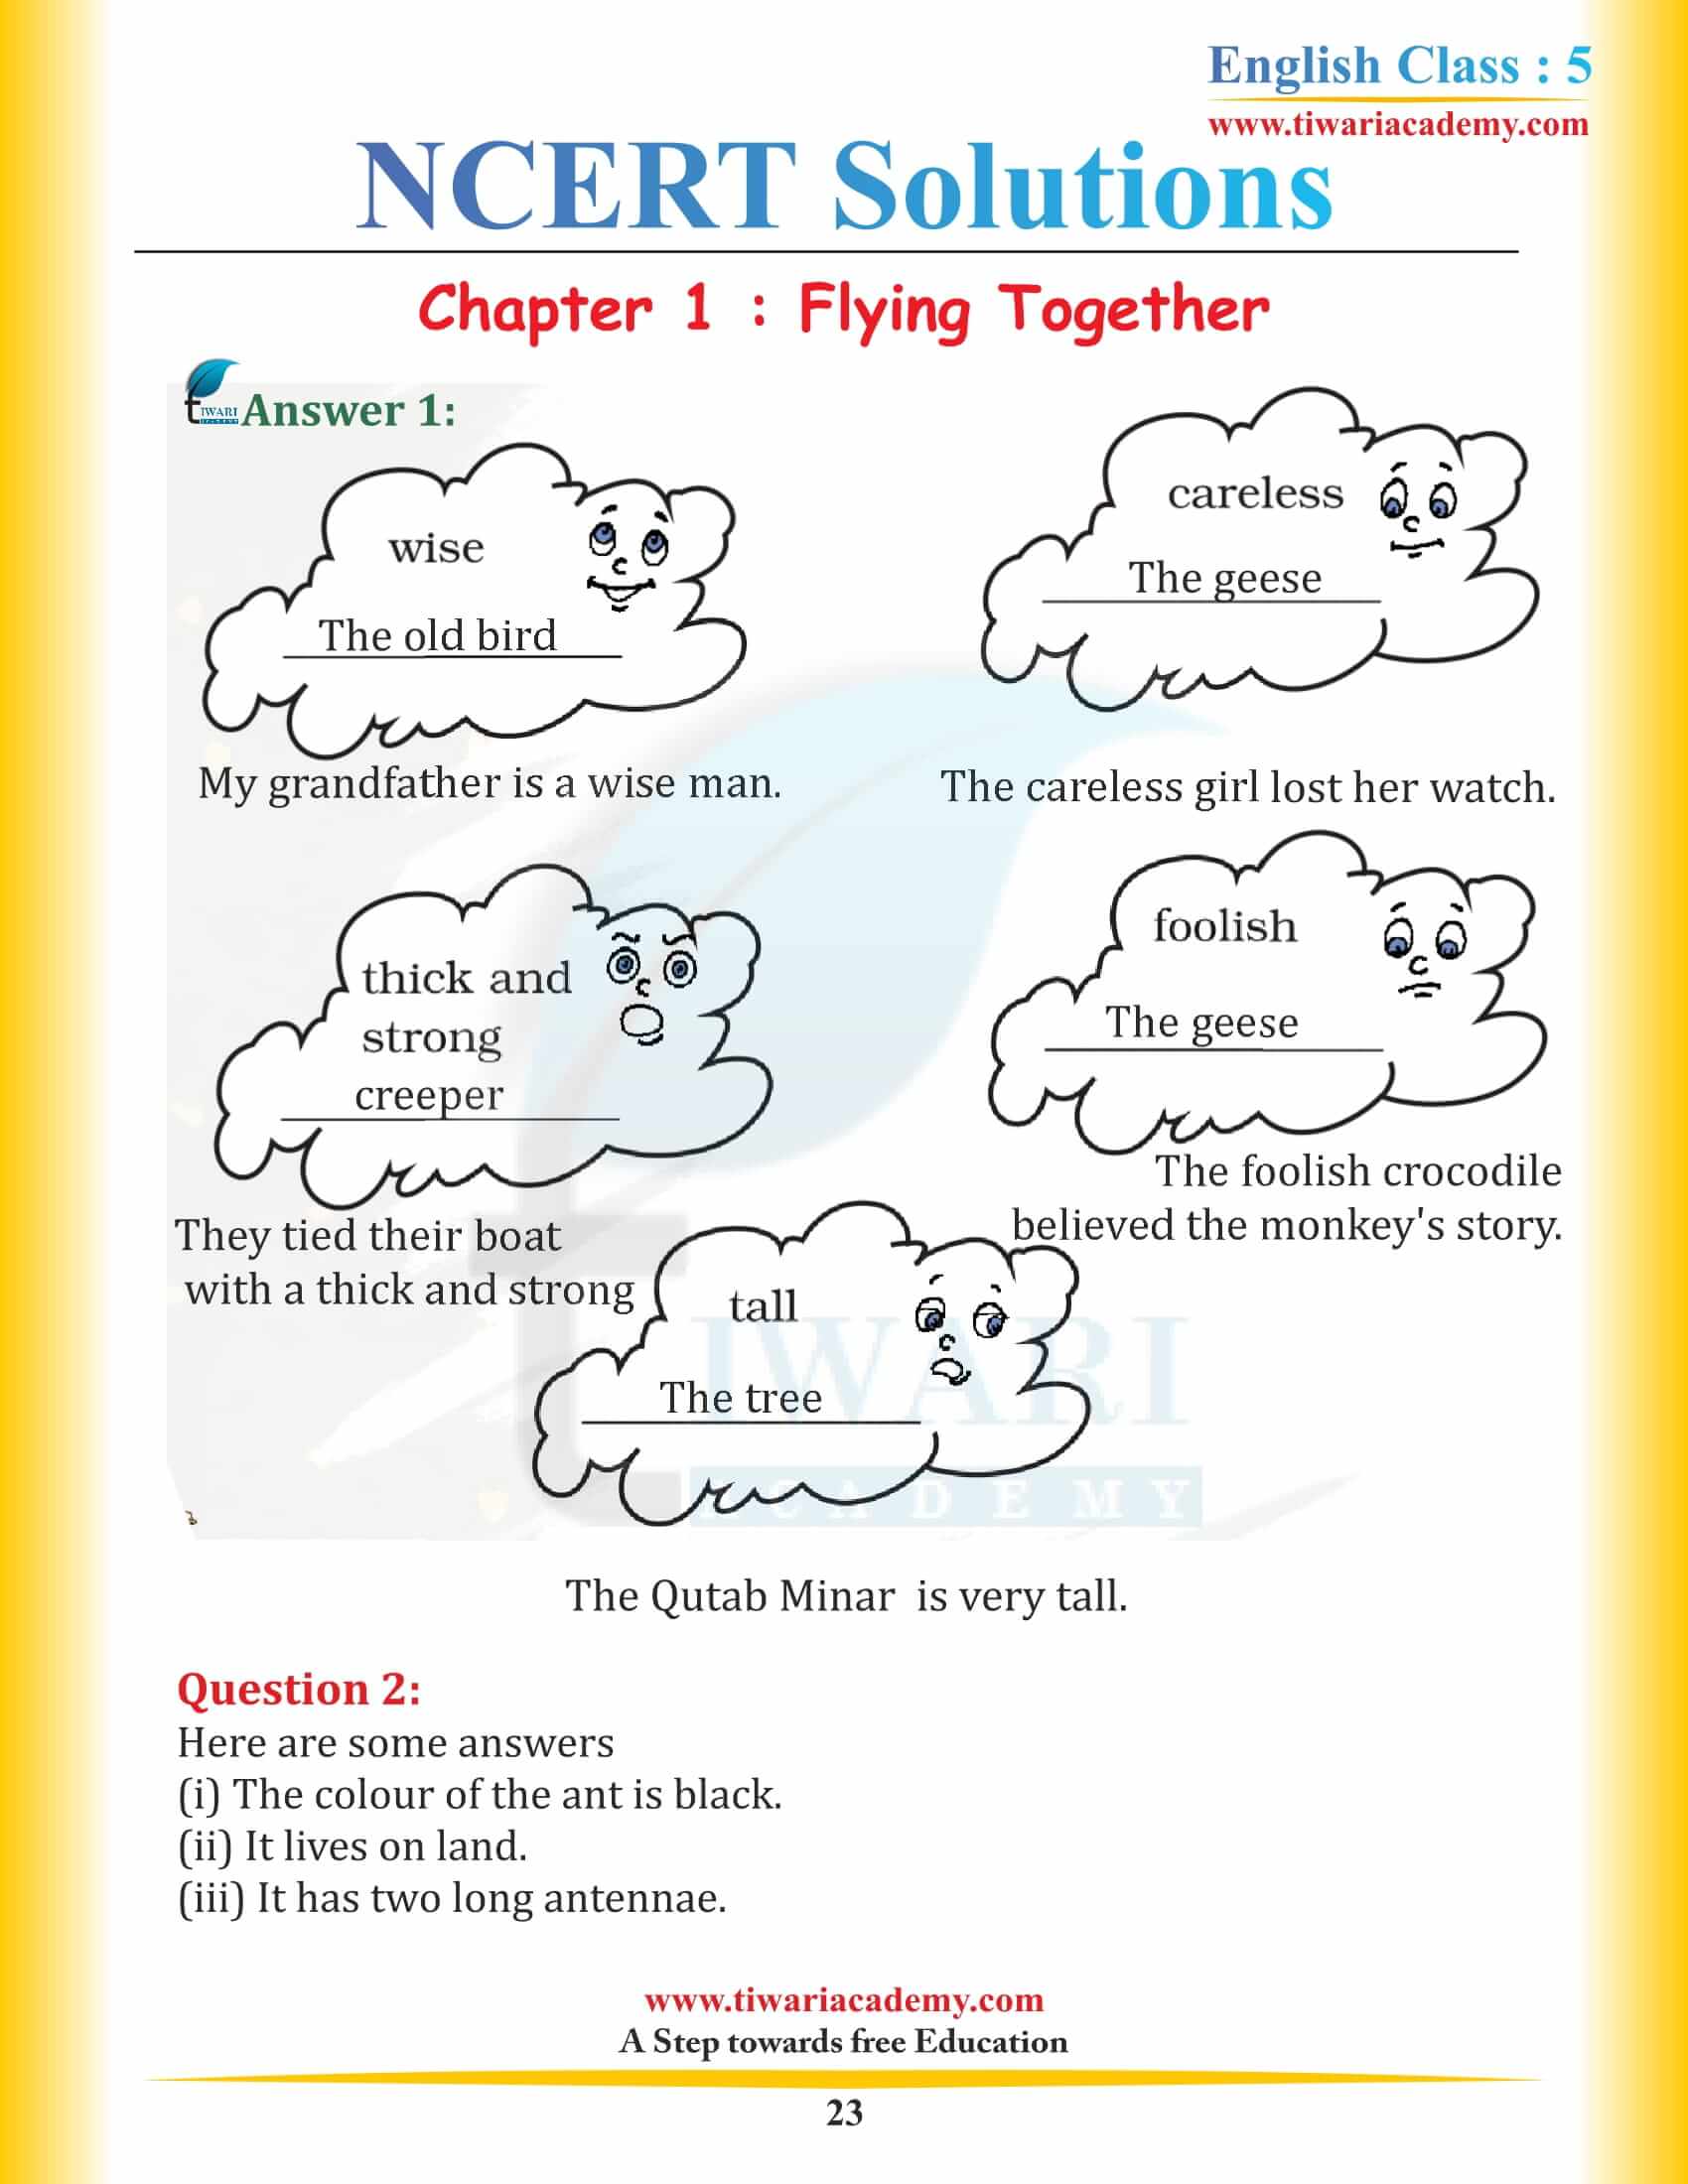 NCERT Class 5 English Chapter 1 Flying Together Solutions